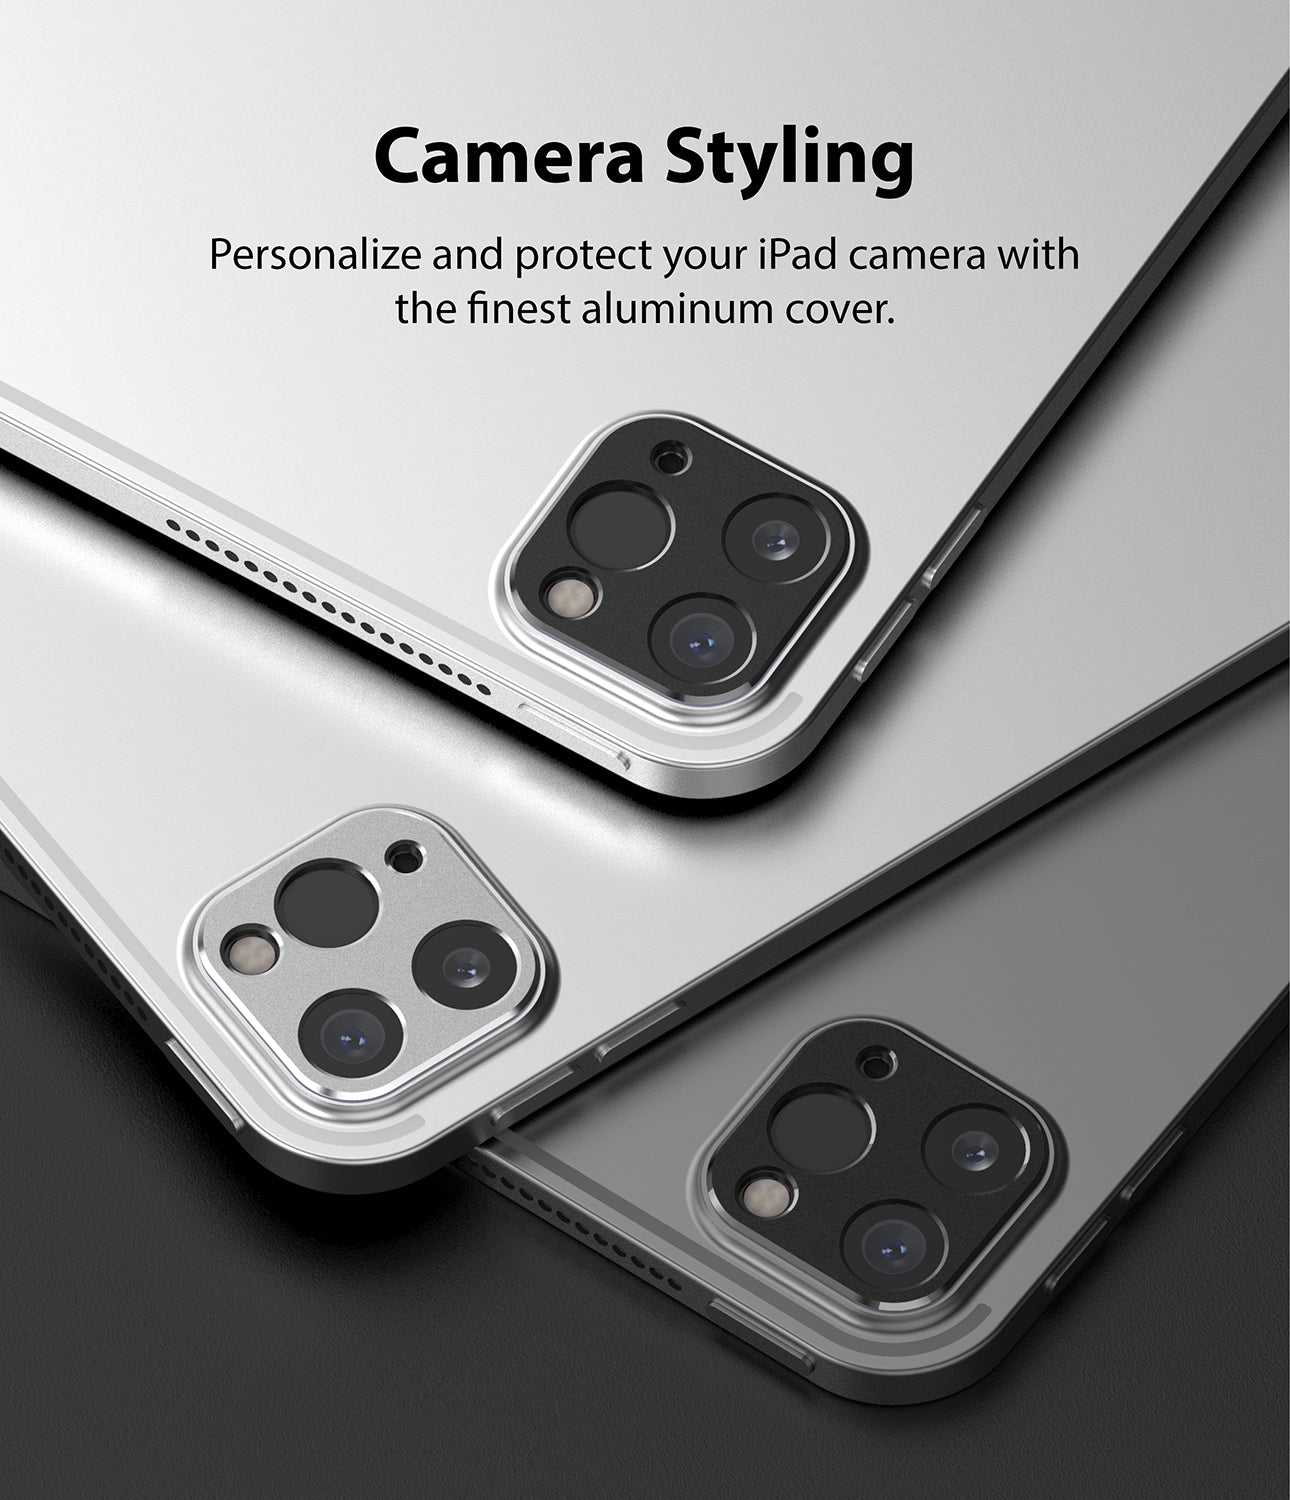 personalize and protect your ipad camera with the finest aluminum cover